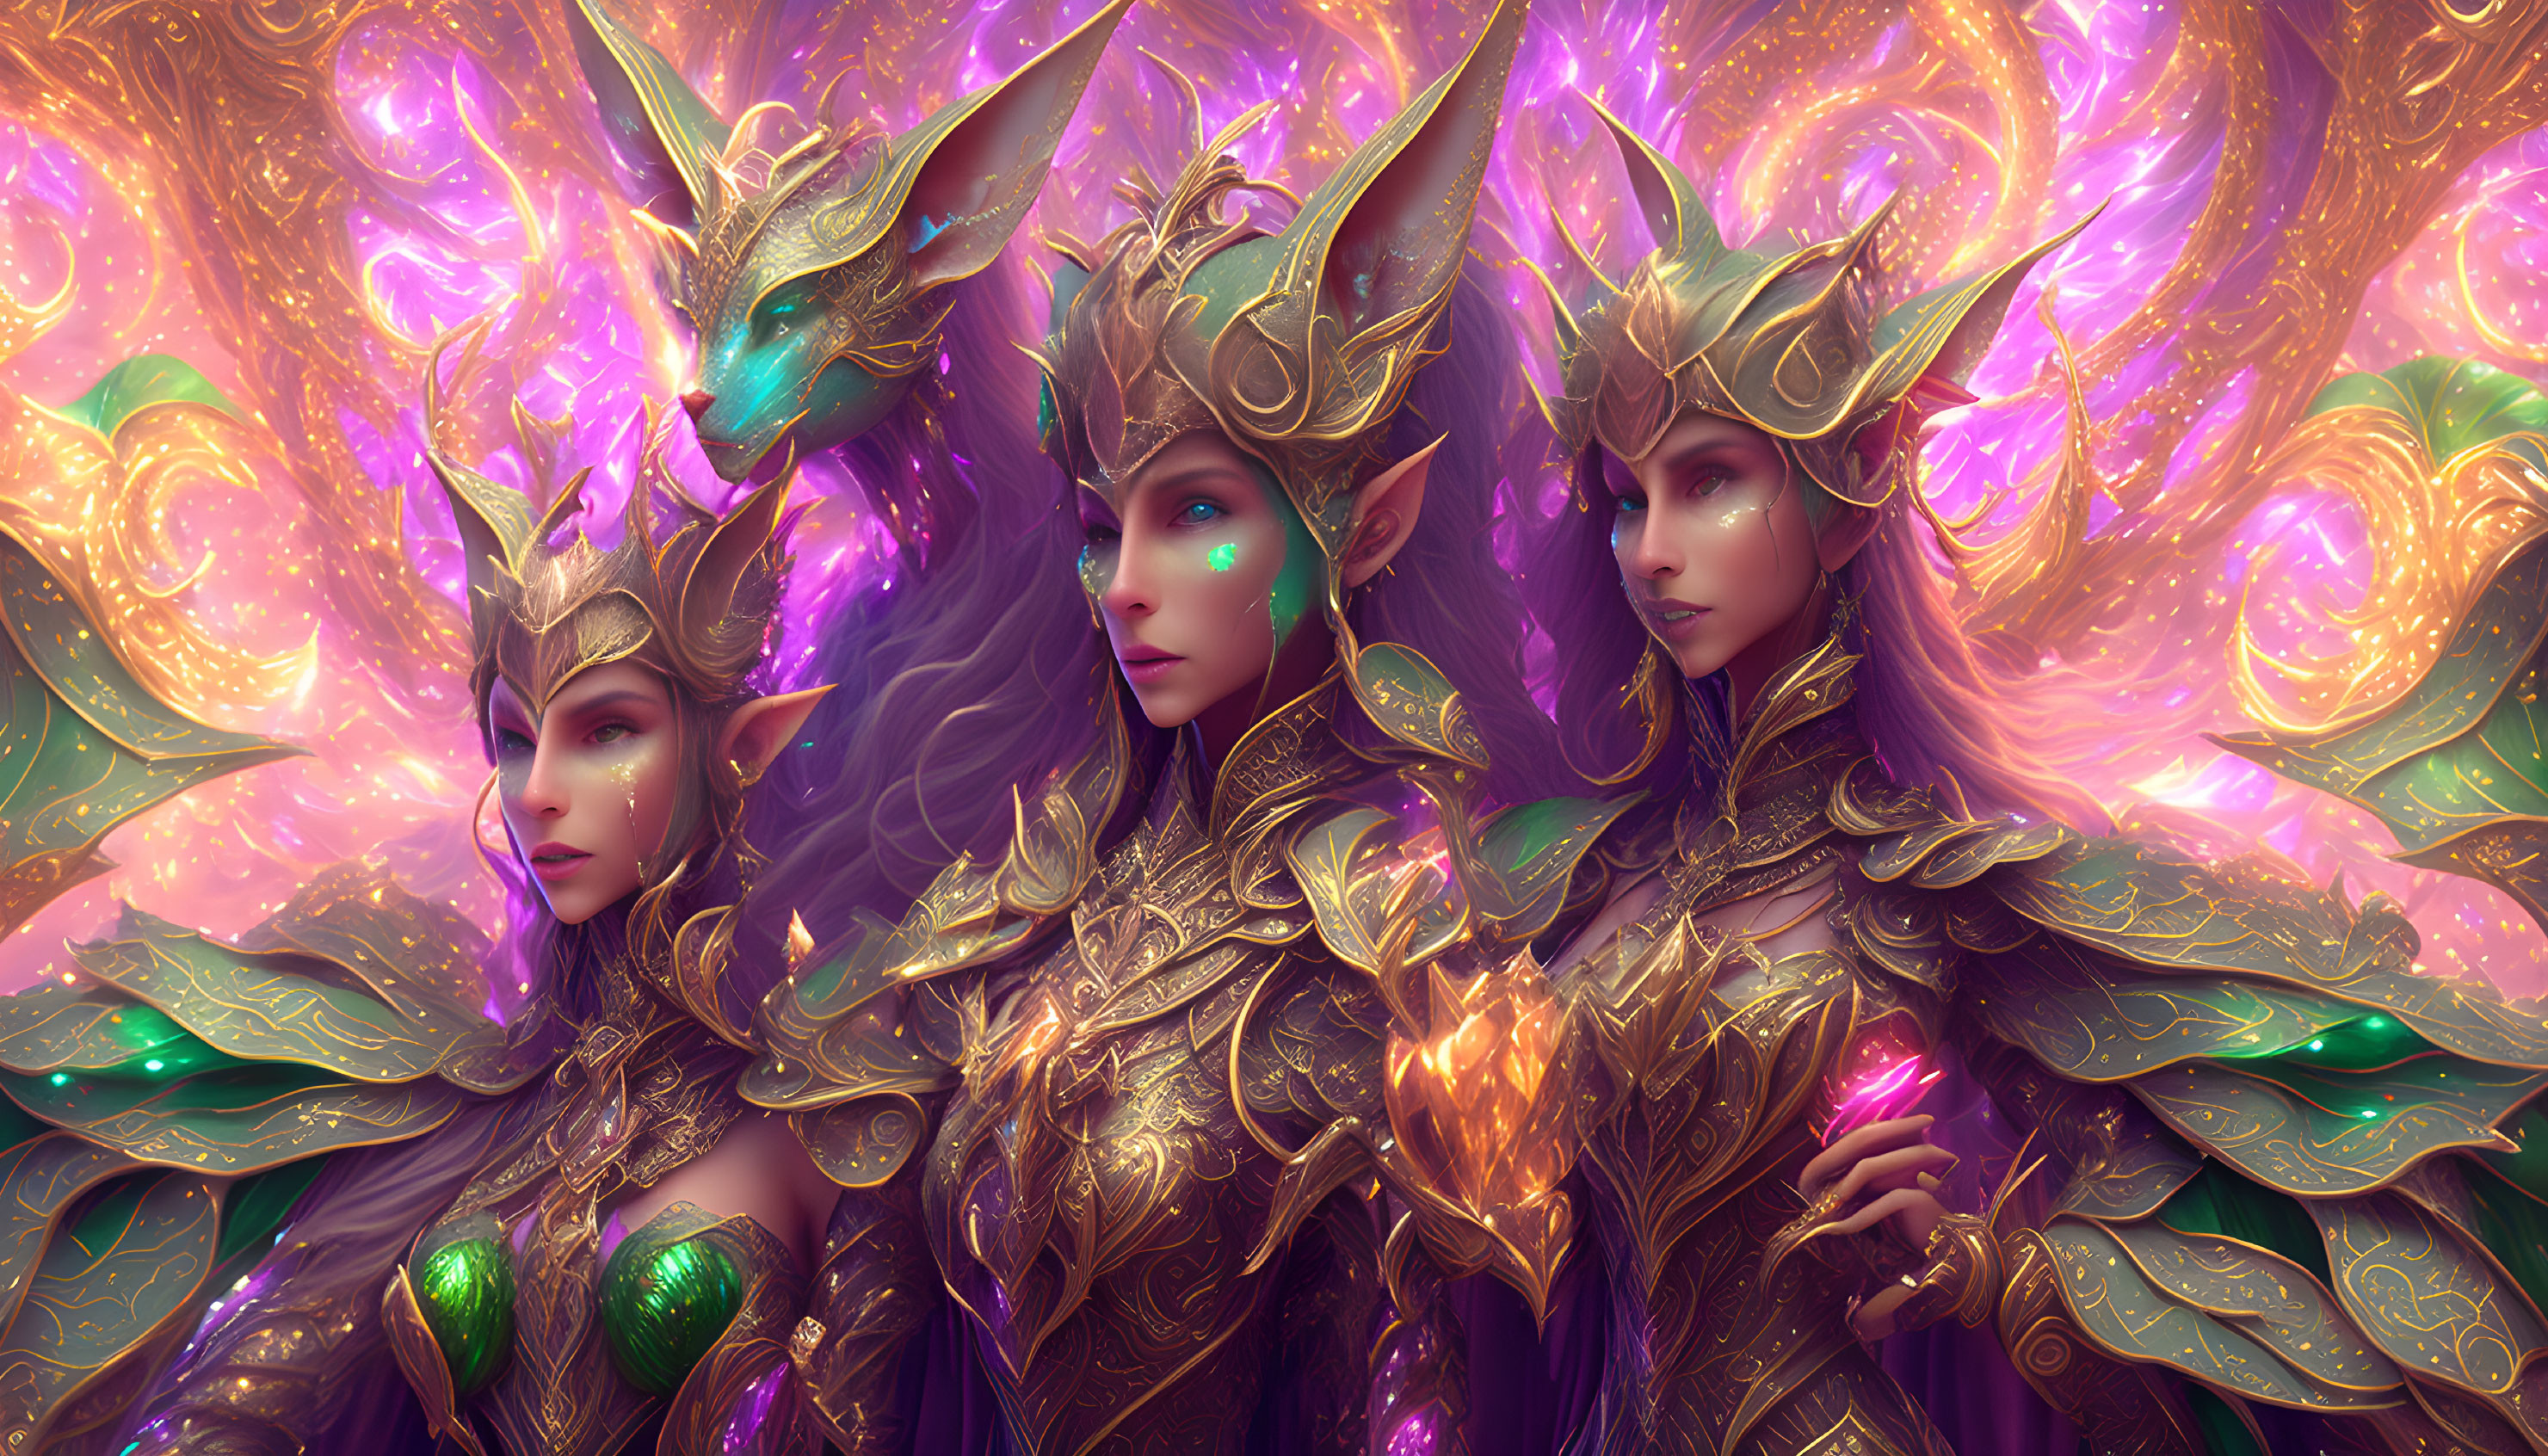 Three mystical female figures in ornate golden armor and headdresses, enveloped in swirling pink and purple